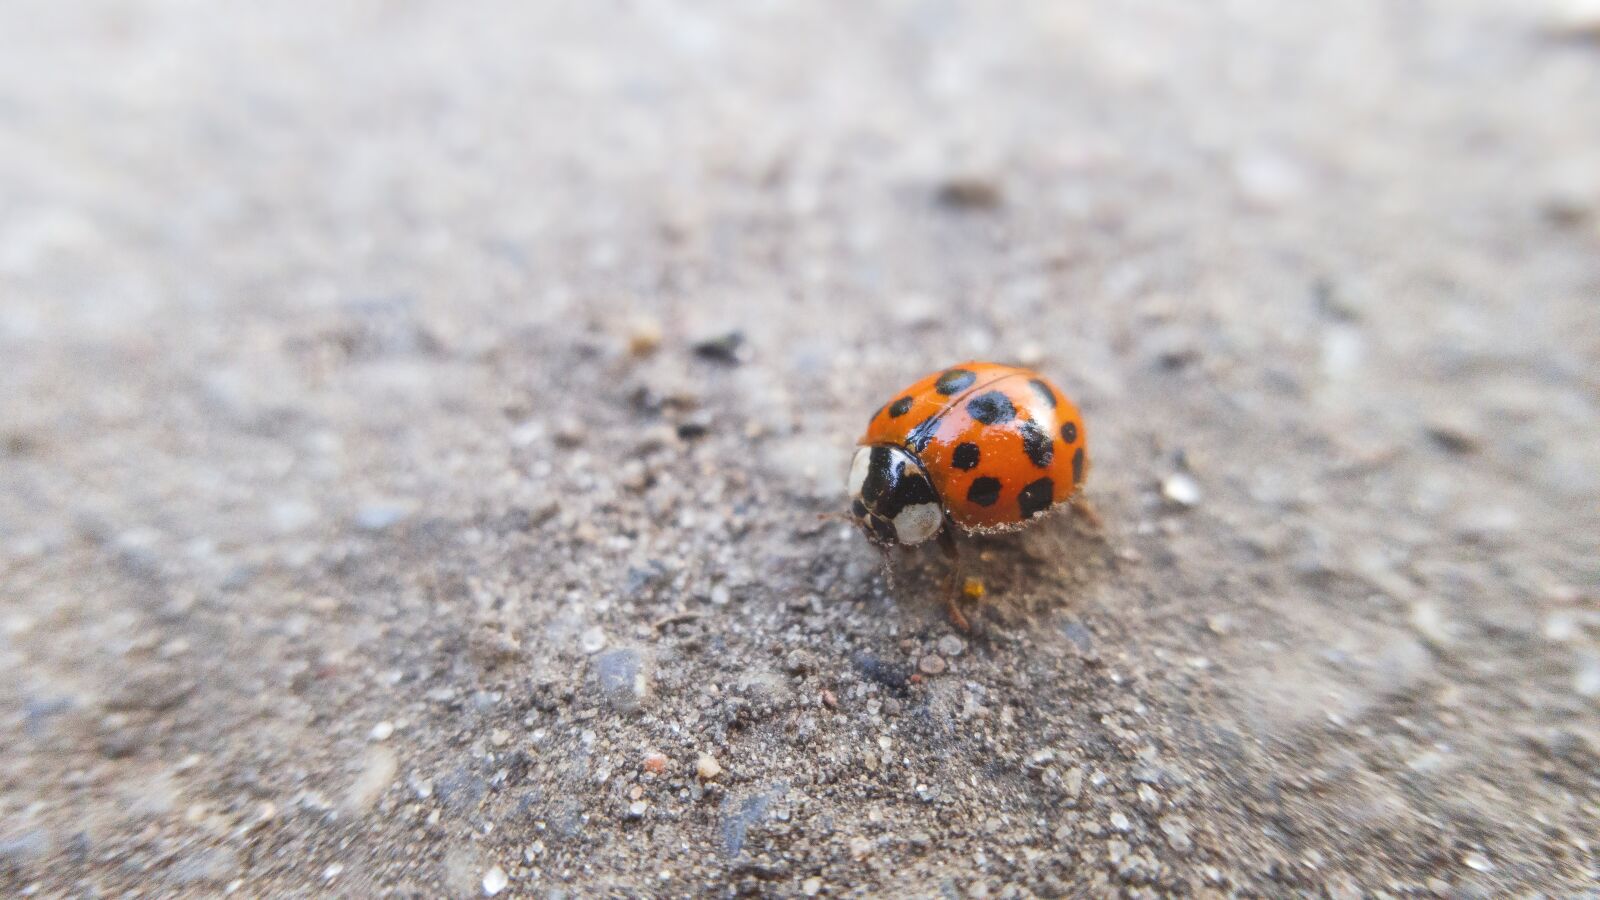 Samsung Galaxy S6 sample photo. Beetle, bug, insect photography